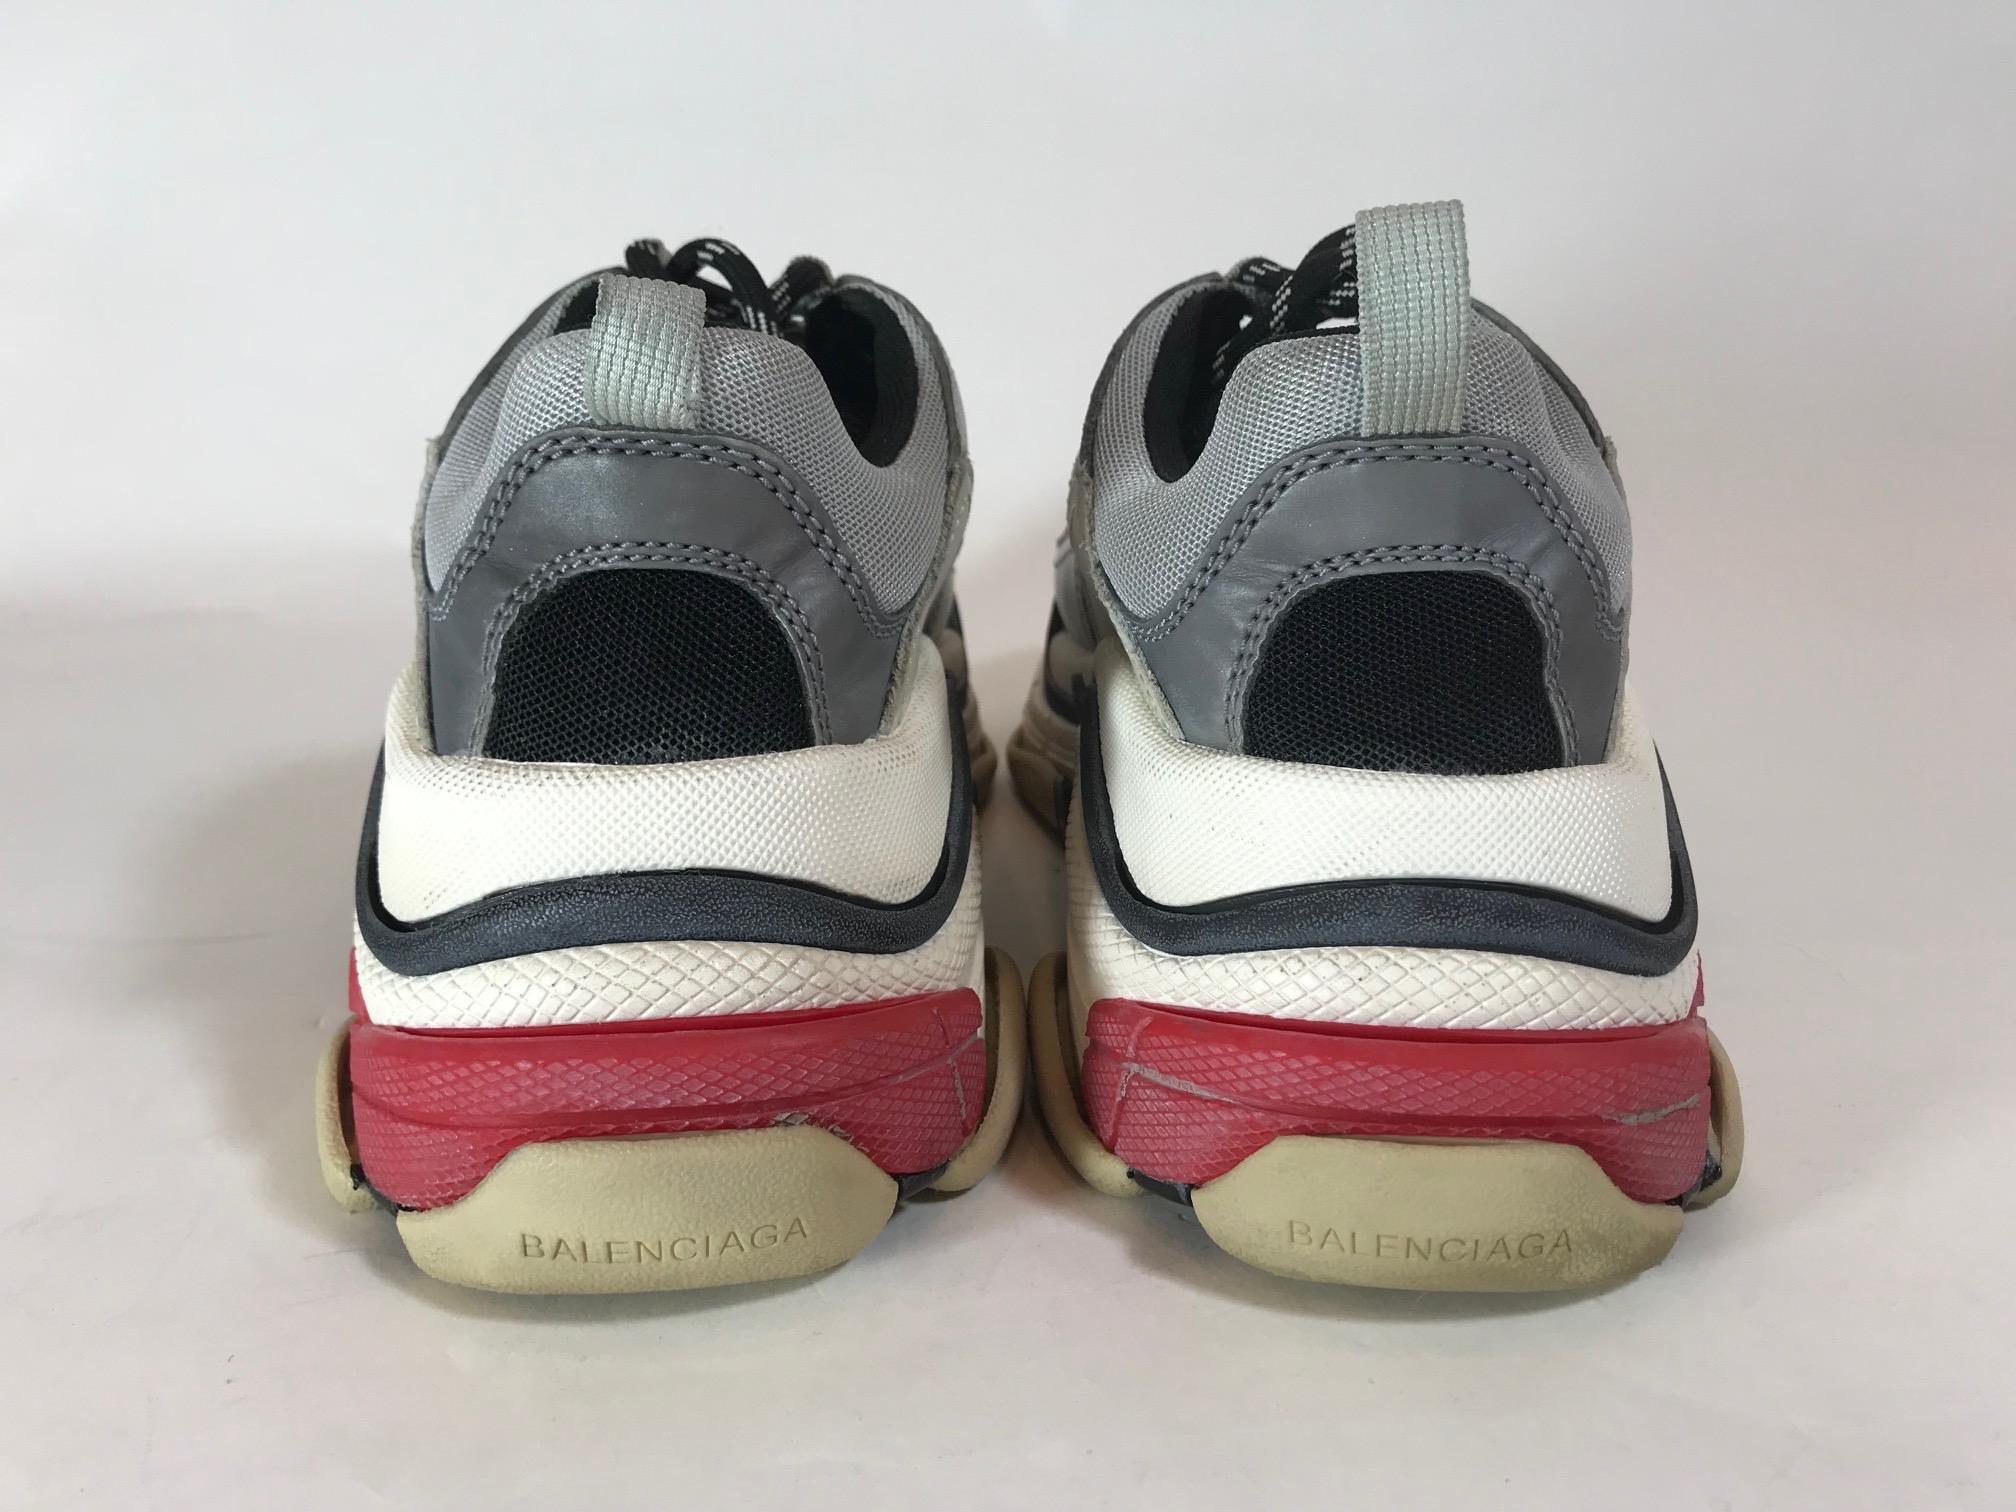 Balenciaga 2018 Triple S Trainers w/ Box In Excellent Condition For Sale In Roslyn, NY